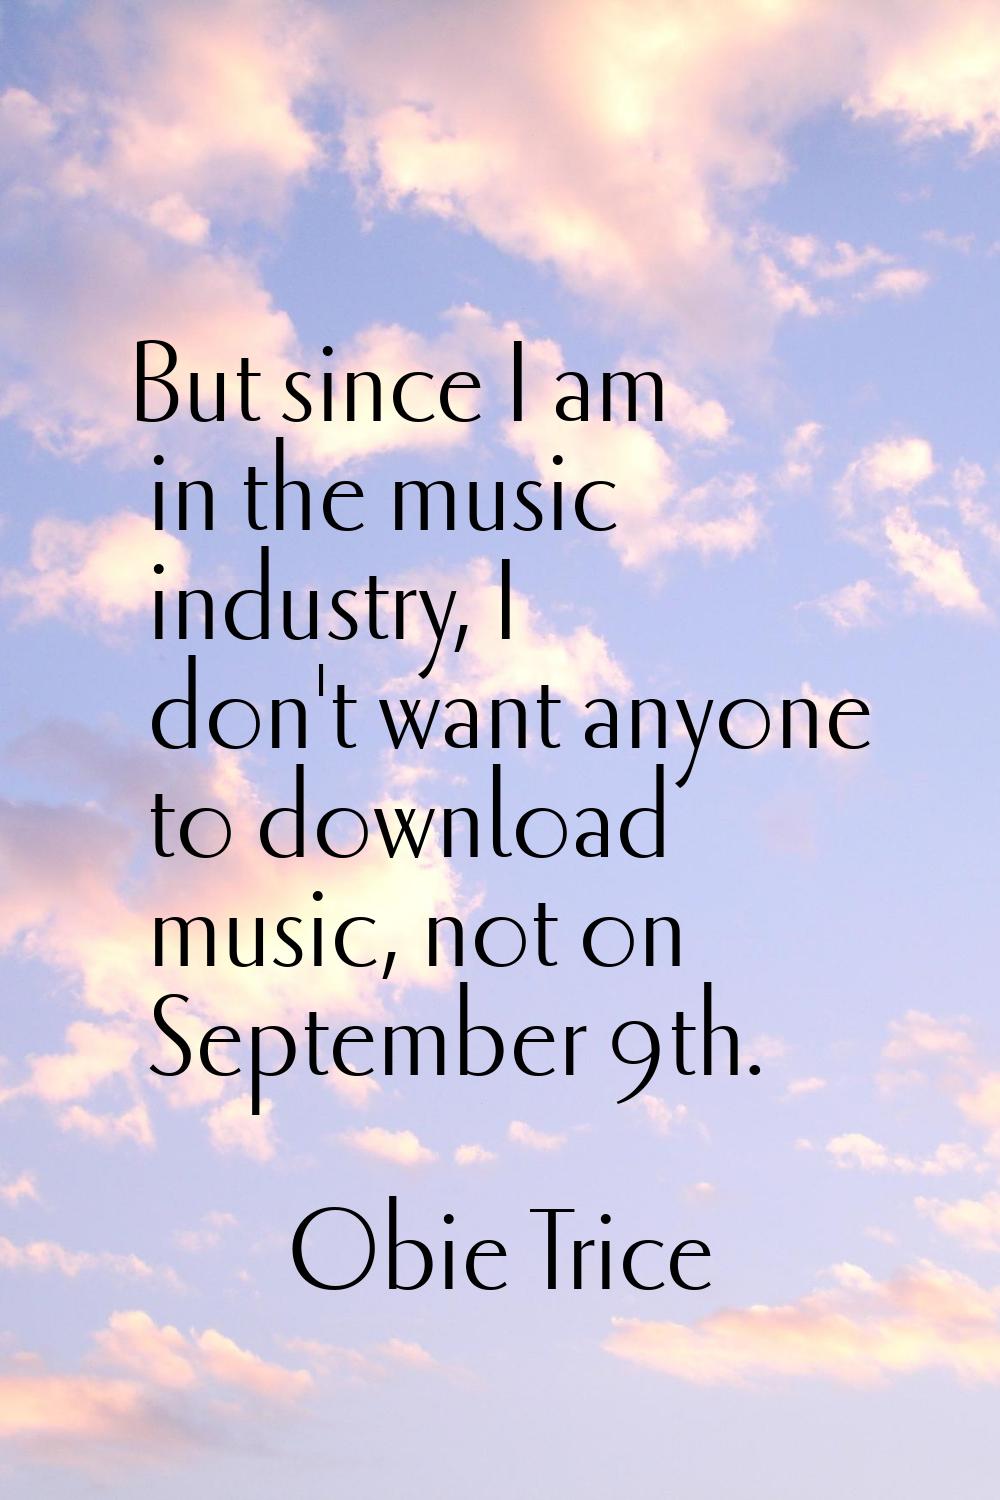 But since I am in the music industry, I don't want anyone to download music, not on September 9th.